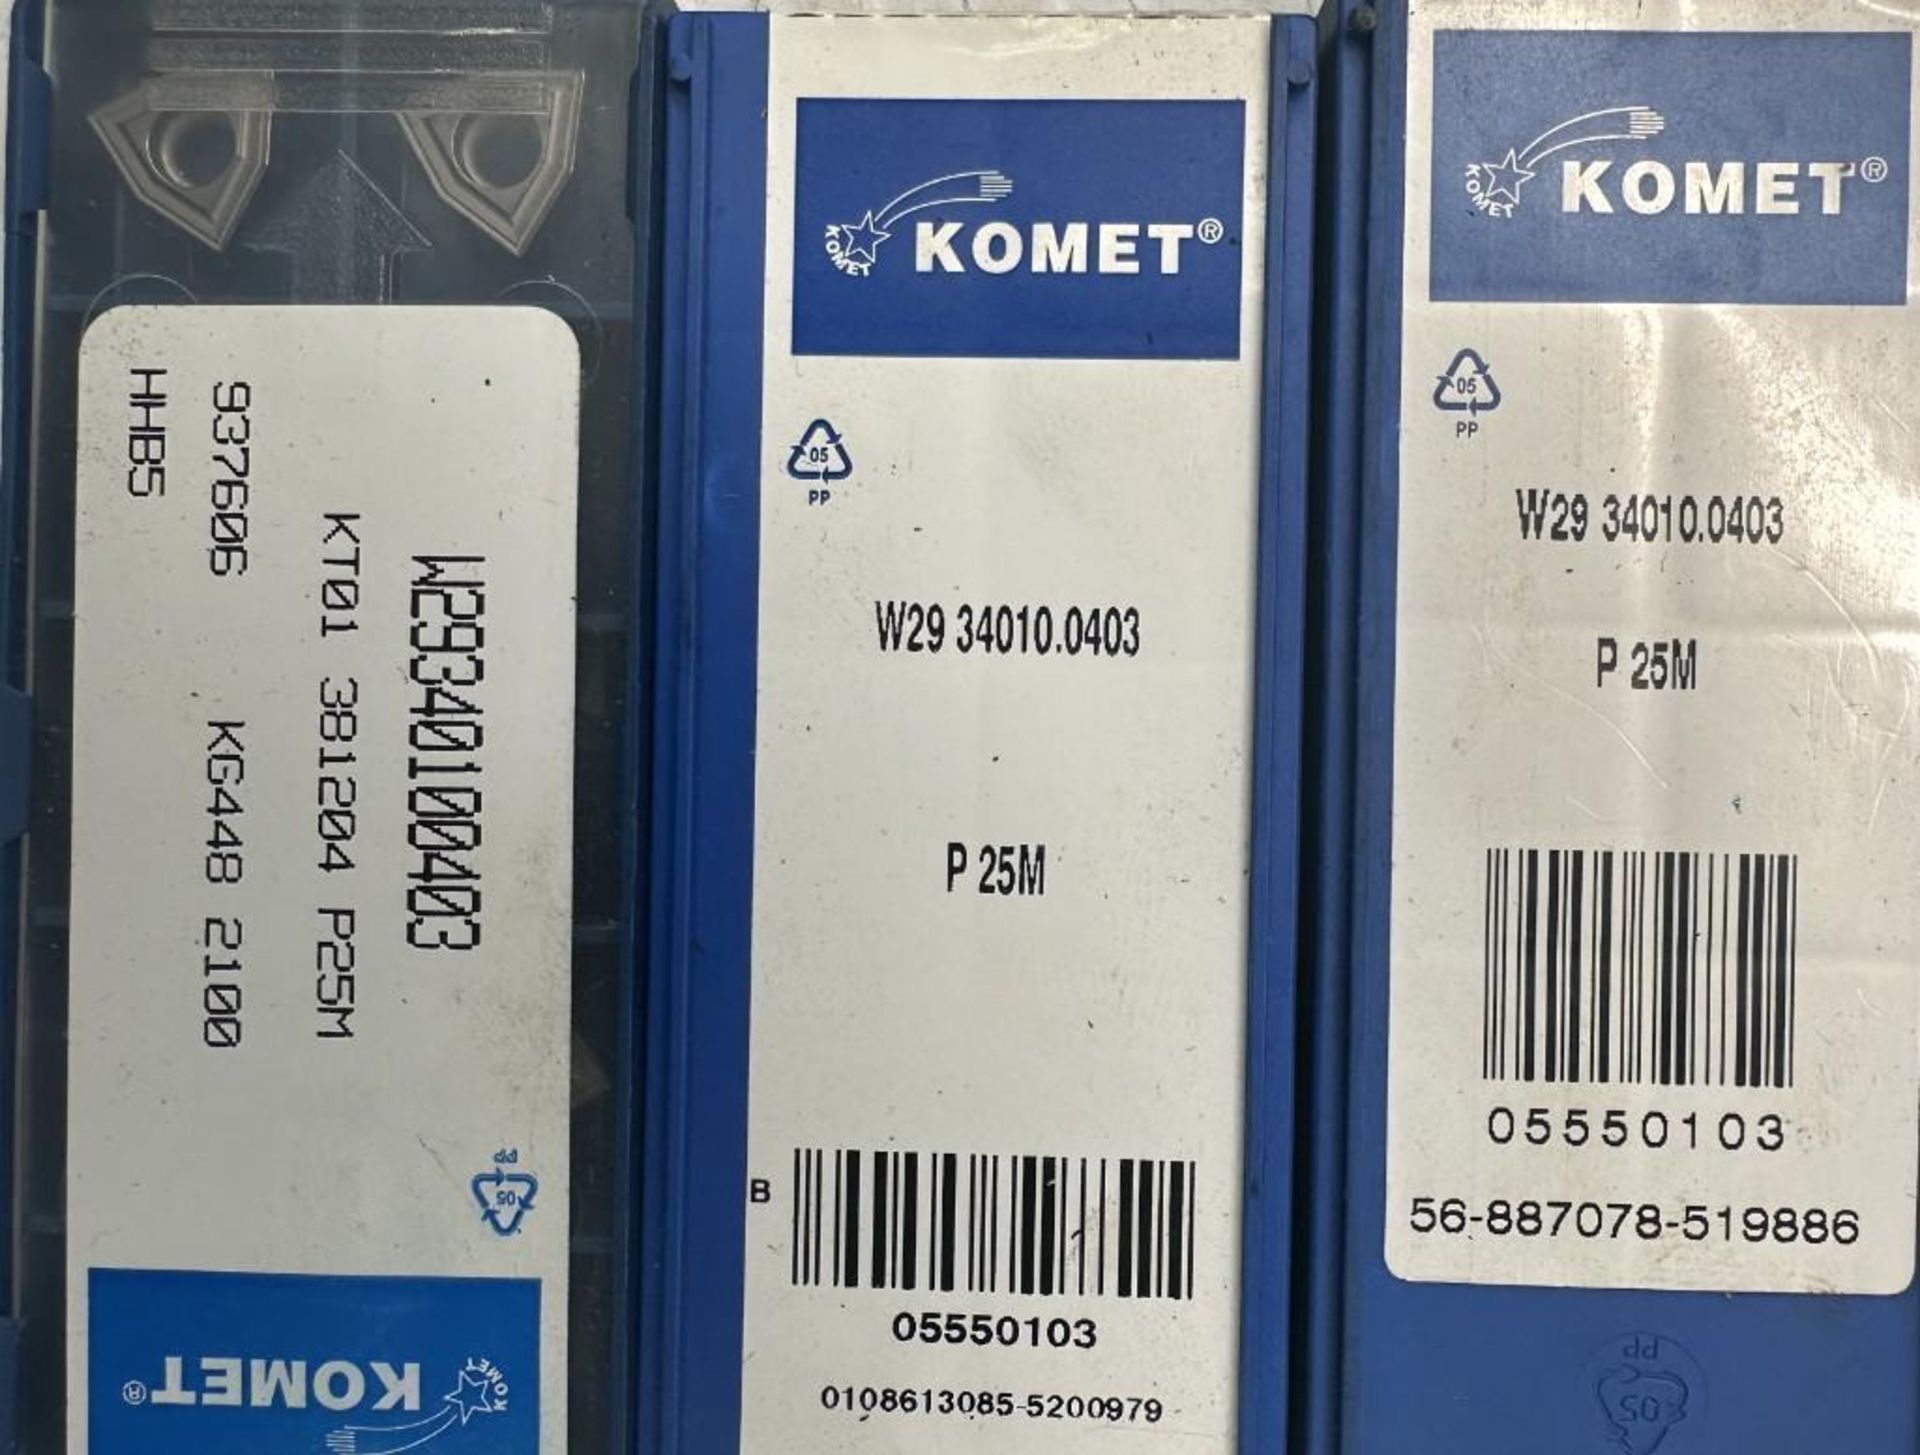 Lot of Komet #W29 34010.0403 Carbide Inserts - Image 4 of 4